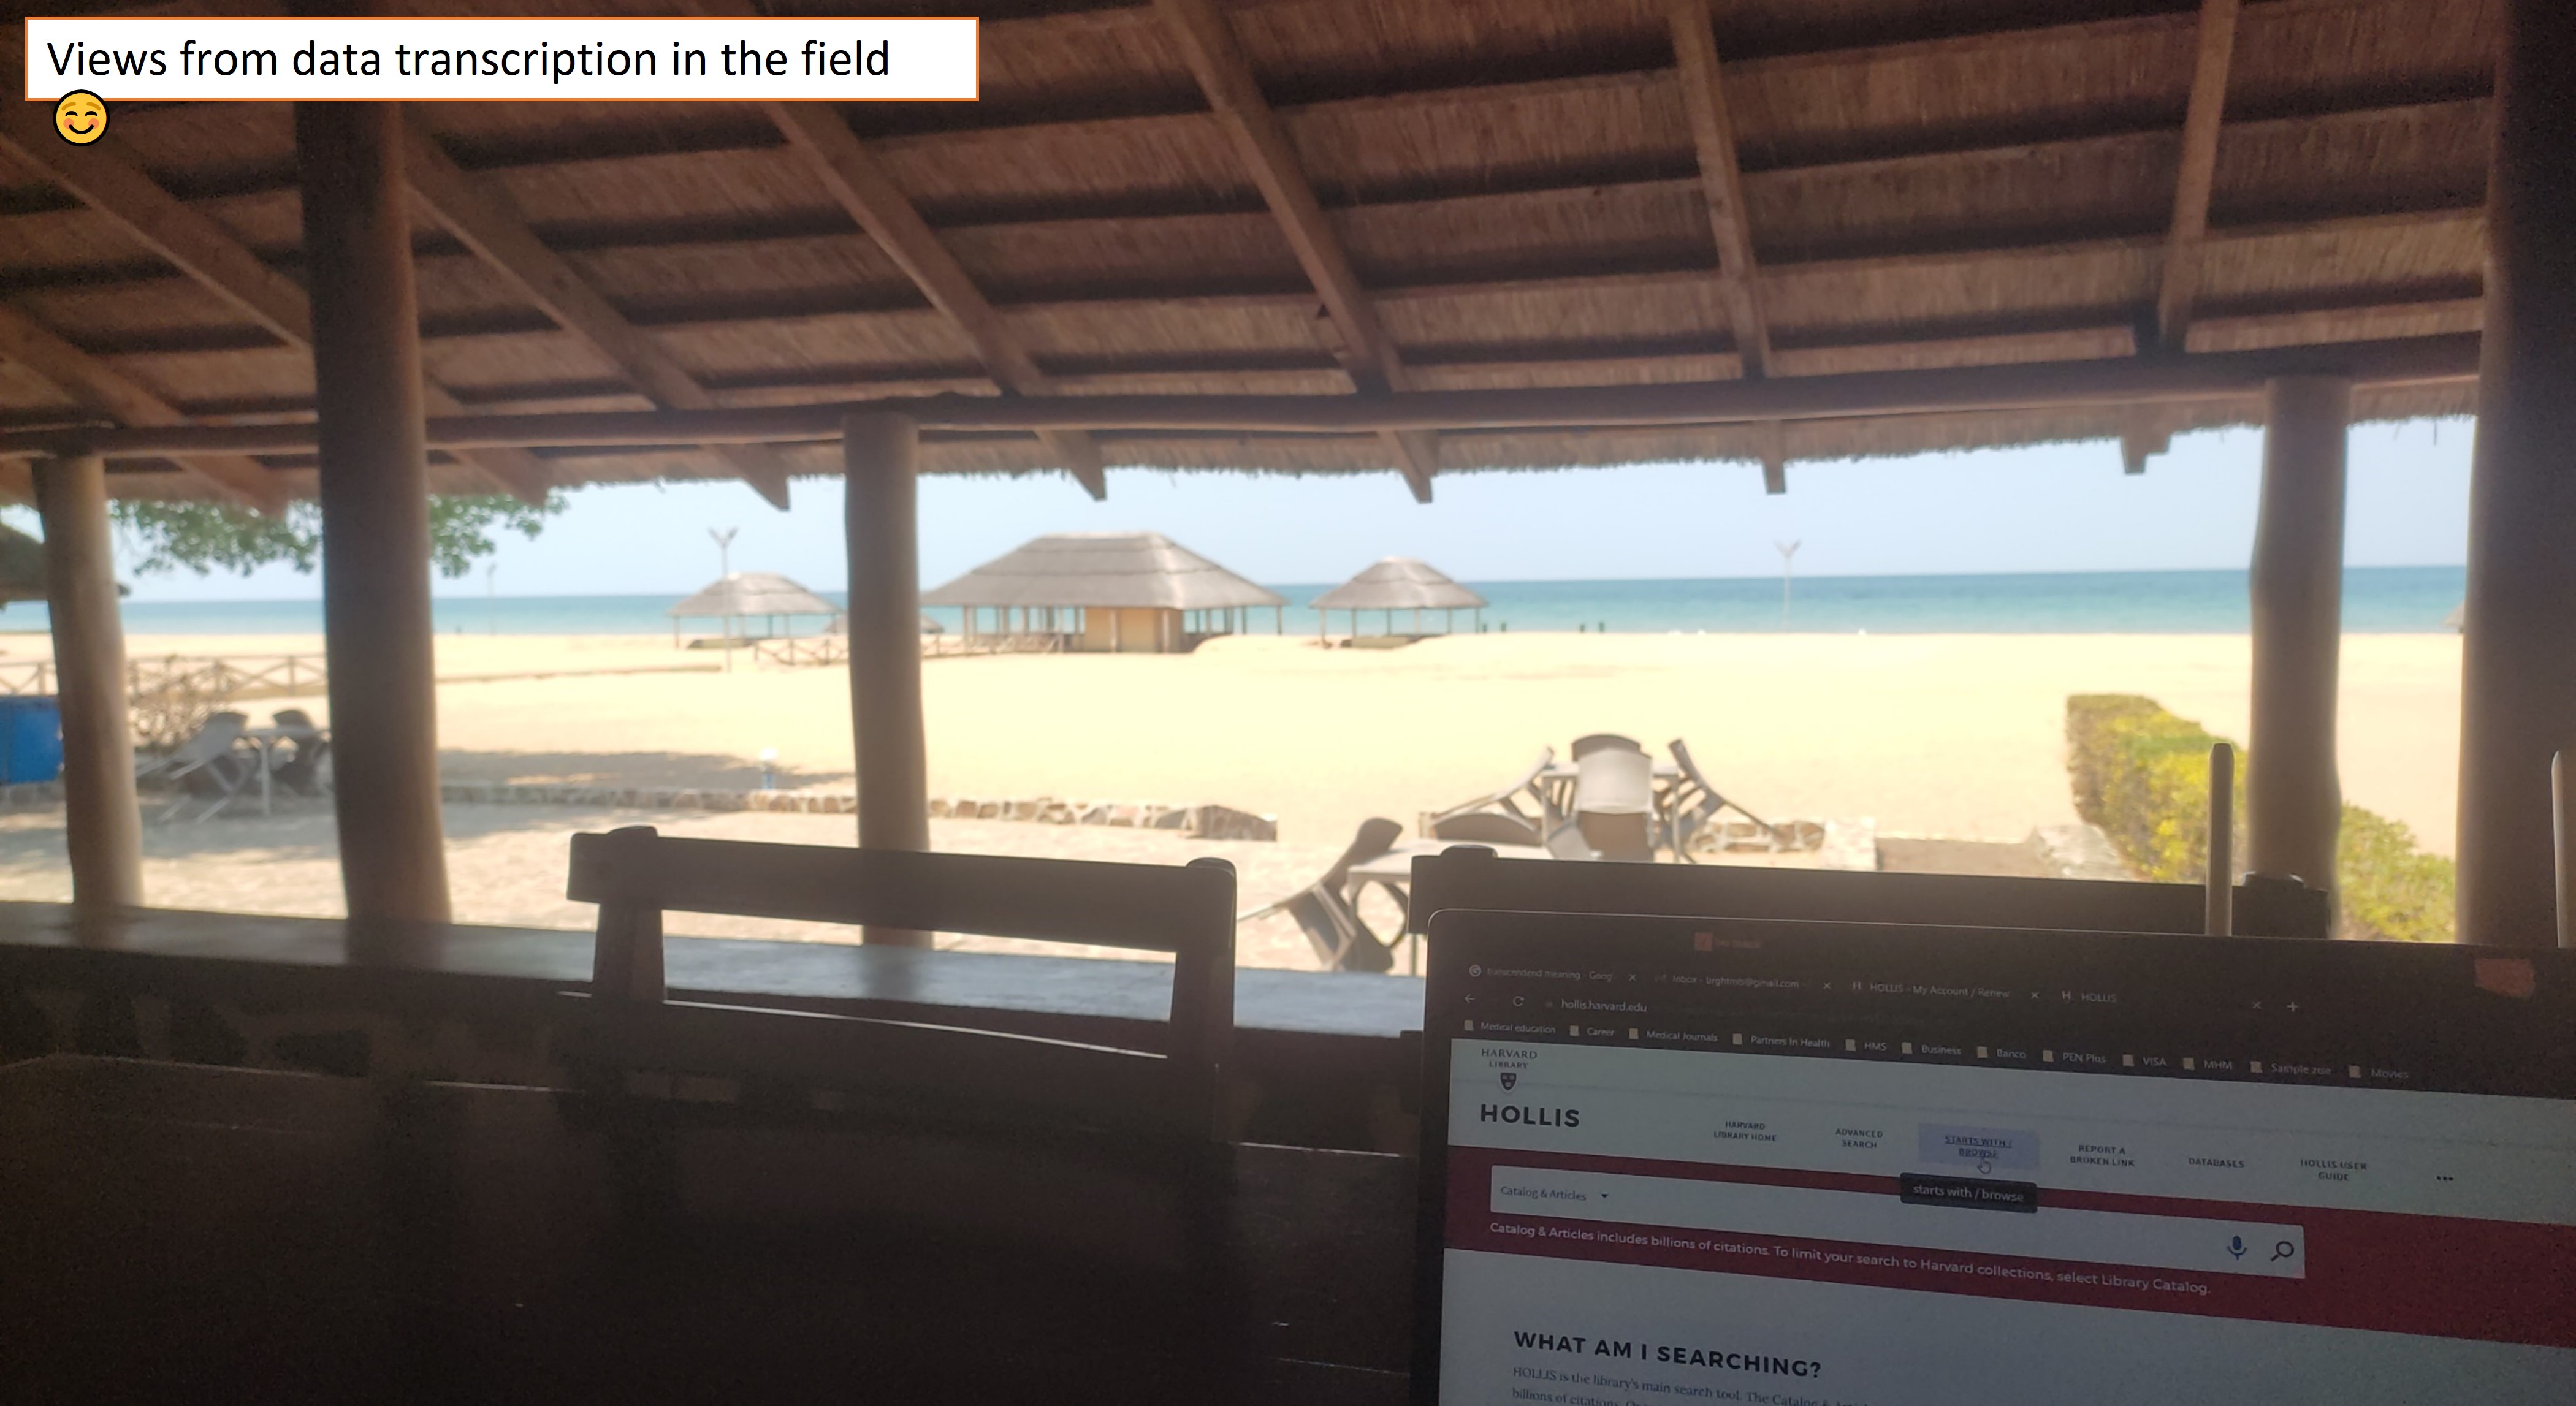 A computer screen with HOLLIS (Harvard Library website) open. A beautiful beach scene is in the background. A text box in the top left hand corner reads "Views from data transcription in the field ☺"